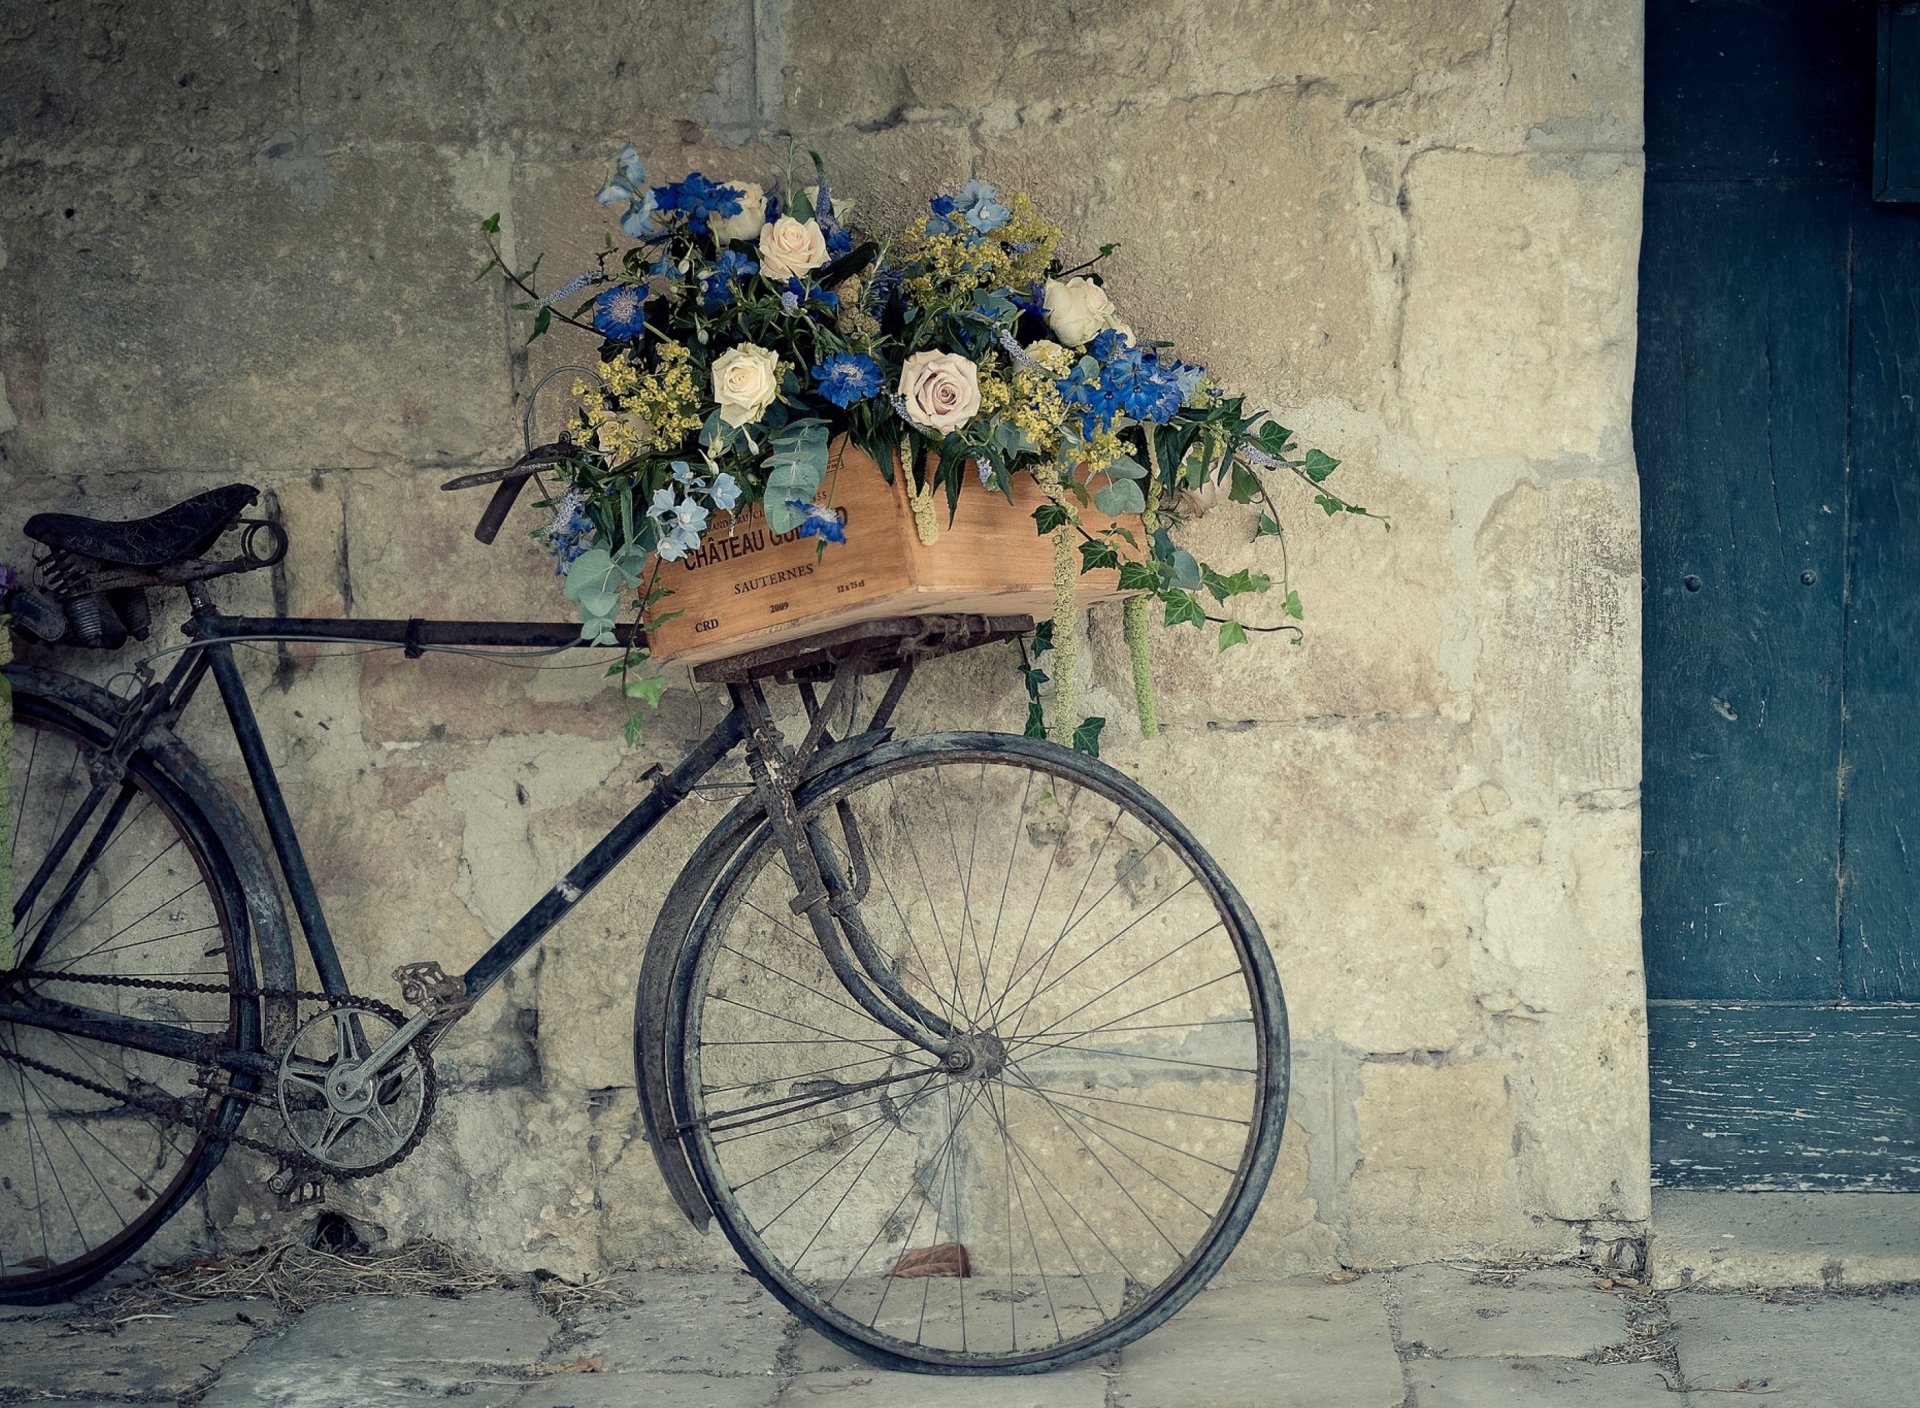 Sfondi Bicycle With Basket Full Of Flowers 1920x1408